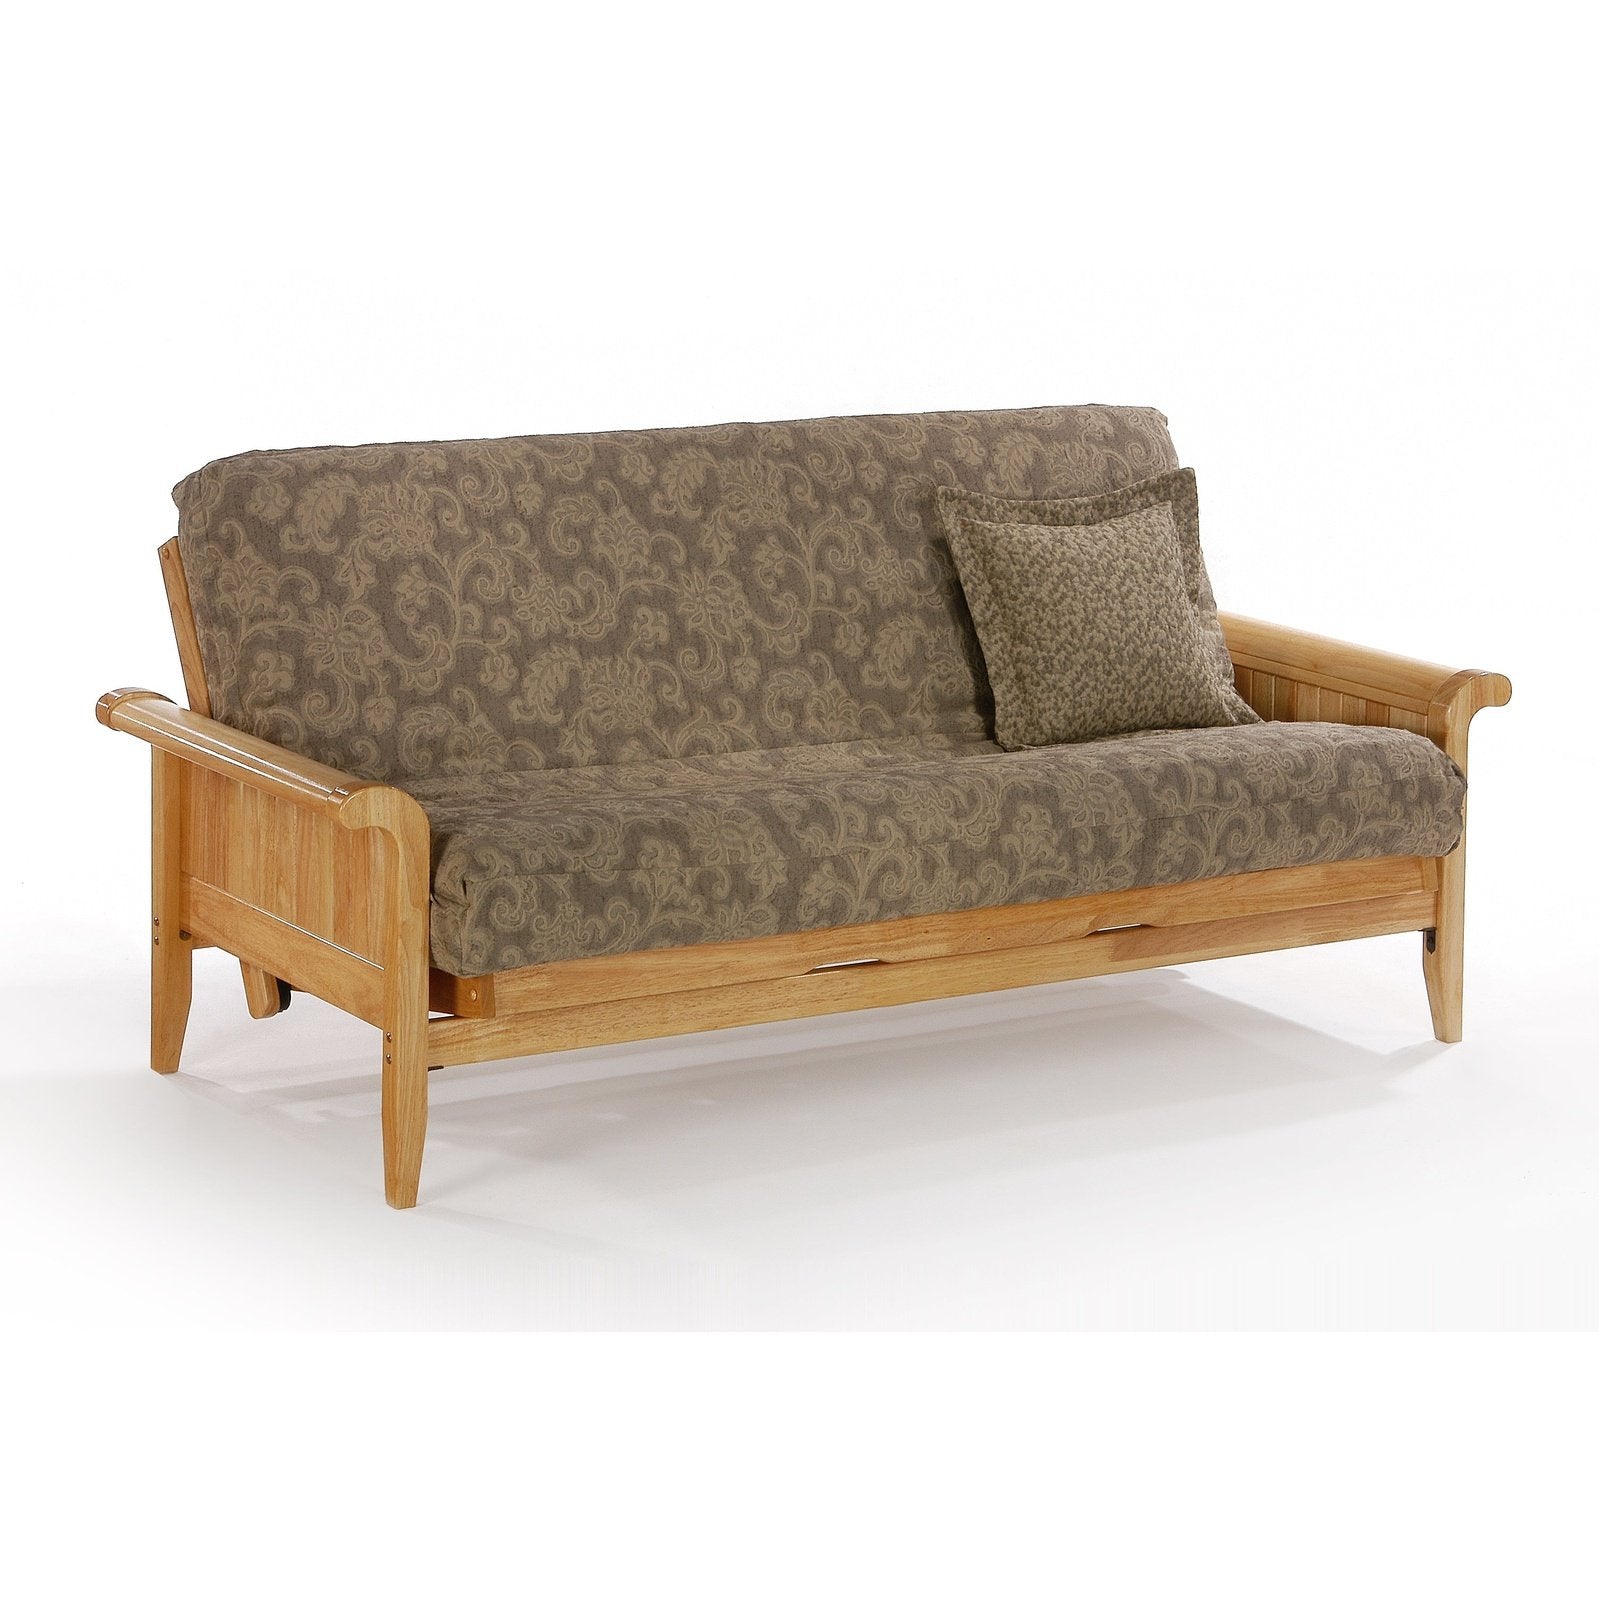 Night and Day Furniture Venice Standard Futon Frame Complete